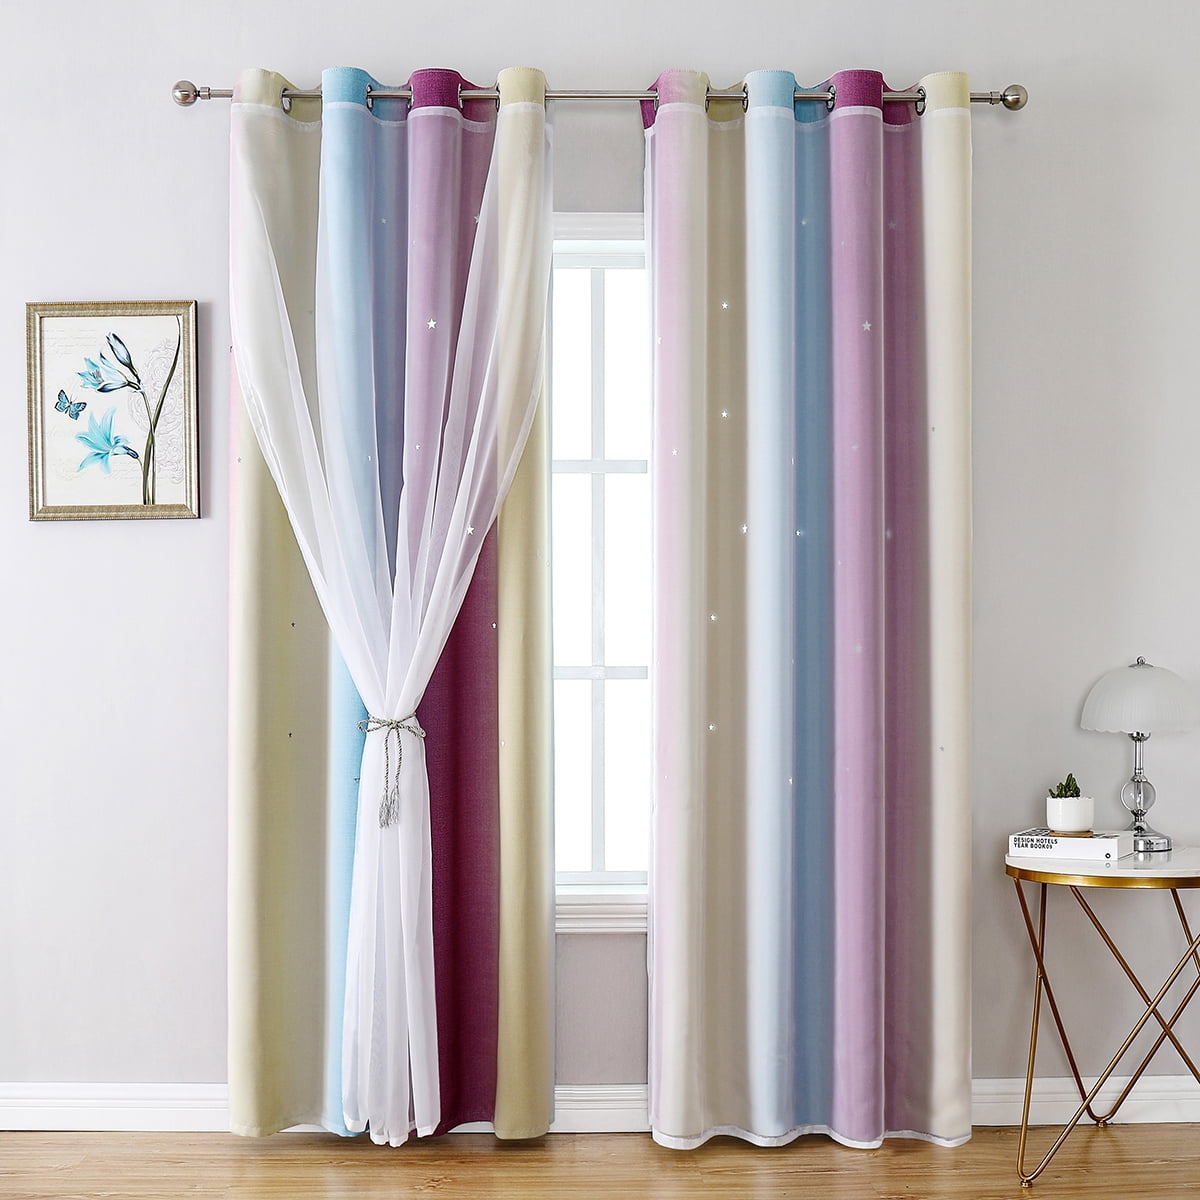 Details about   1/2 Panels Window Curtain Double-Layer Yarn Tulle Hollow-Out Drapes Home Decor 